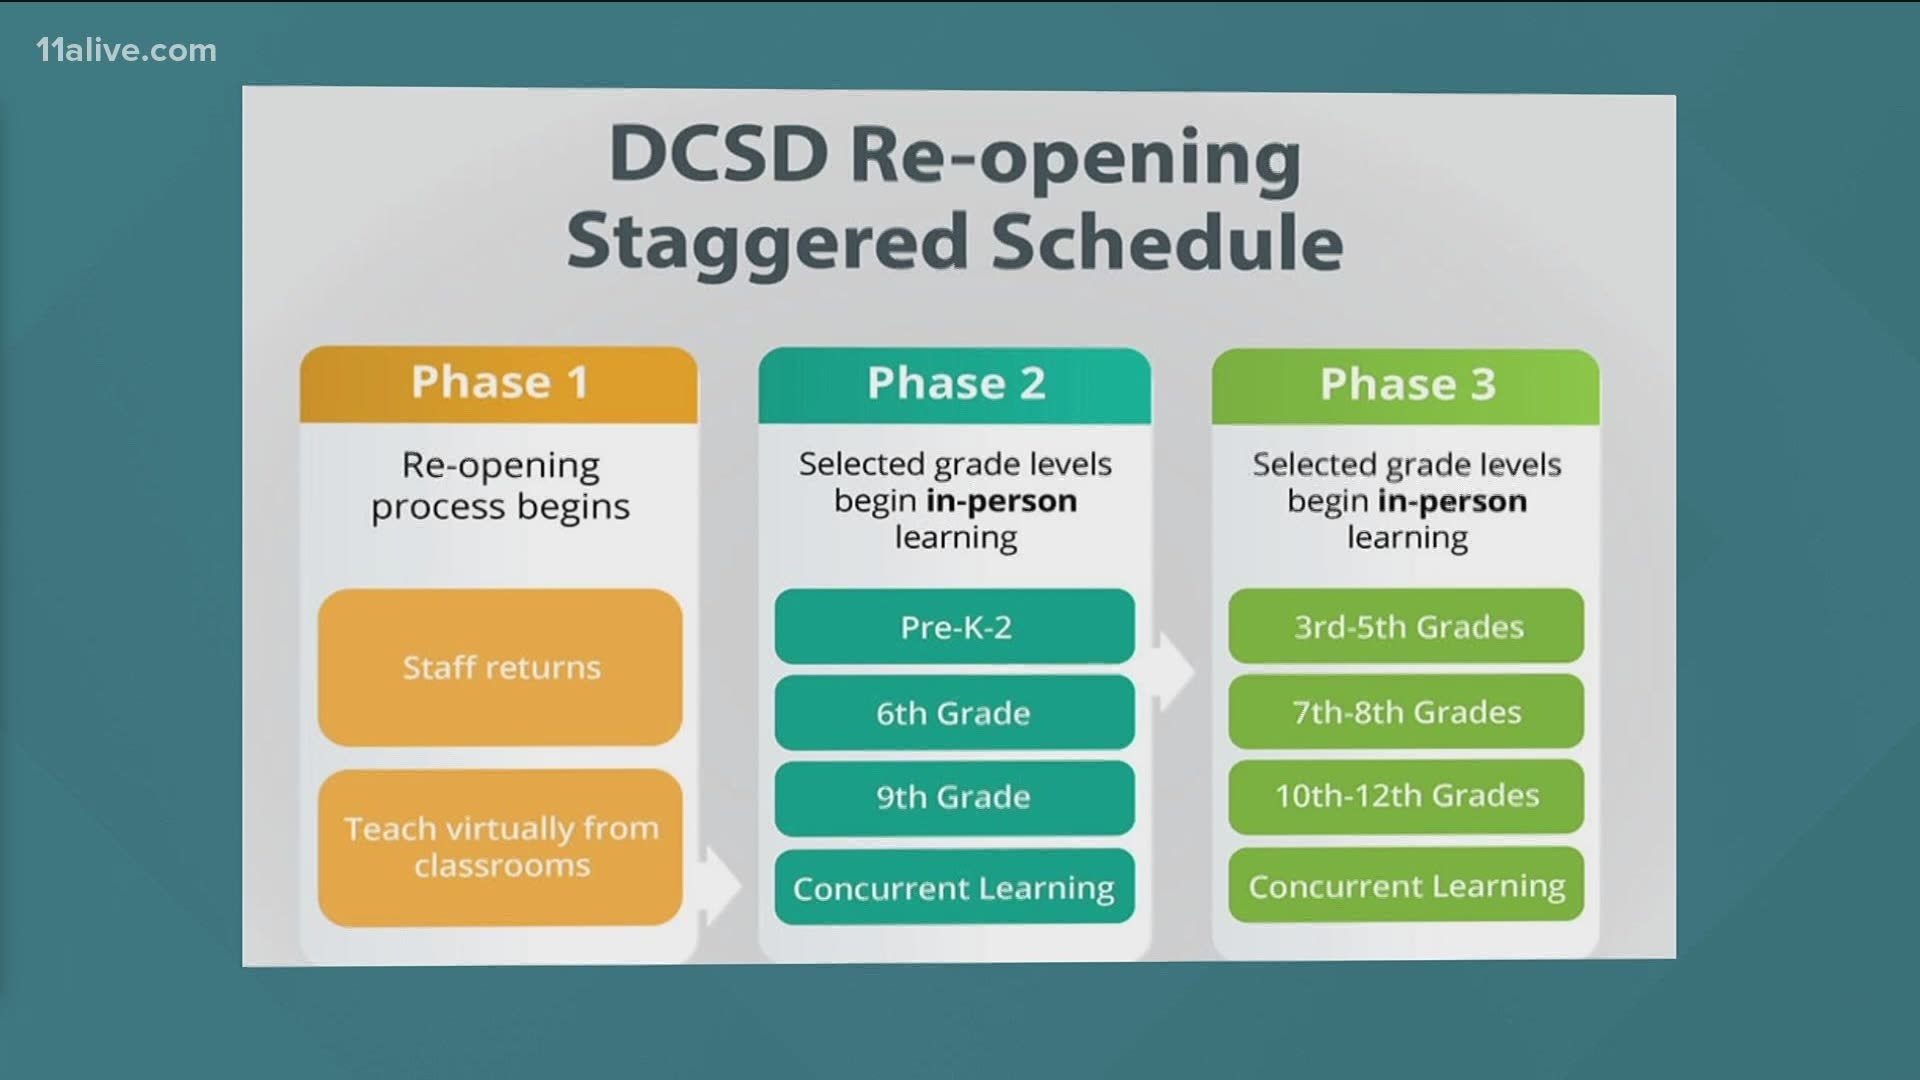 DeKalb County students finally have a timeline for when they will be able to return to in-person learning.